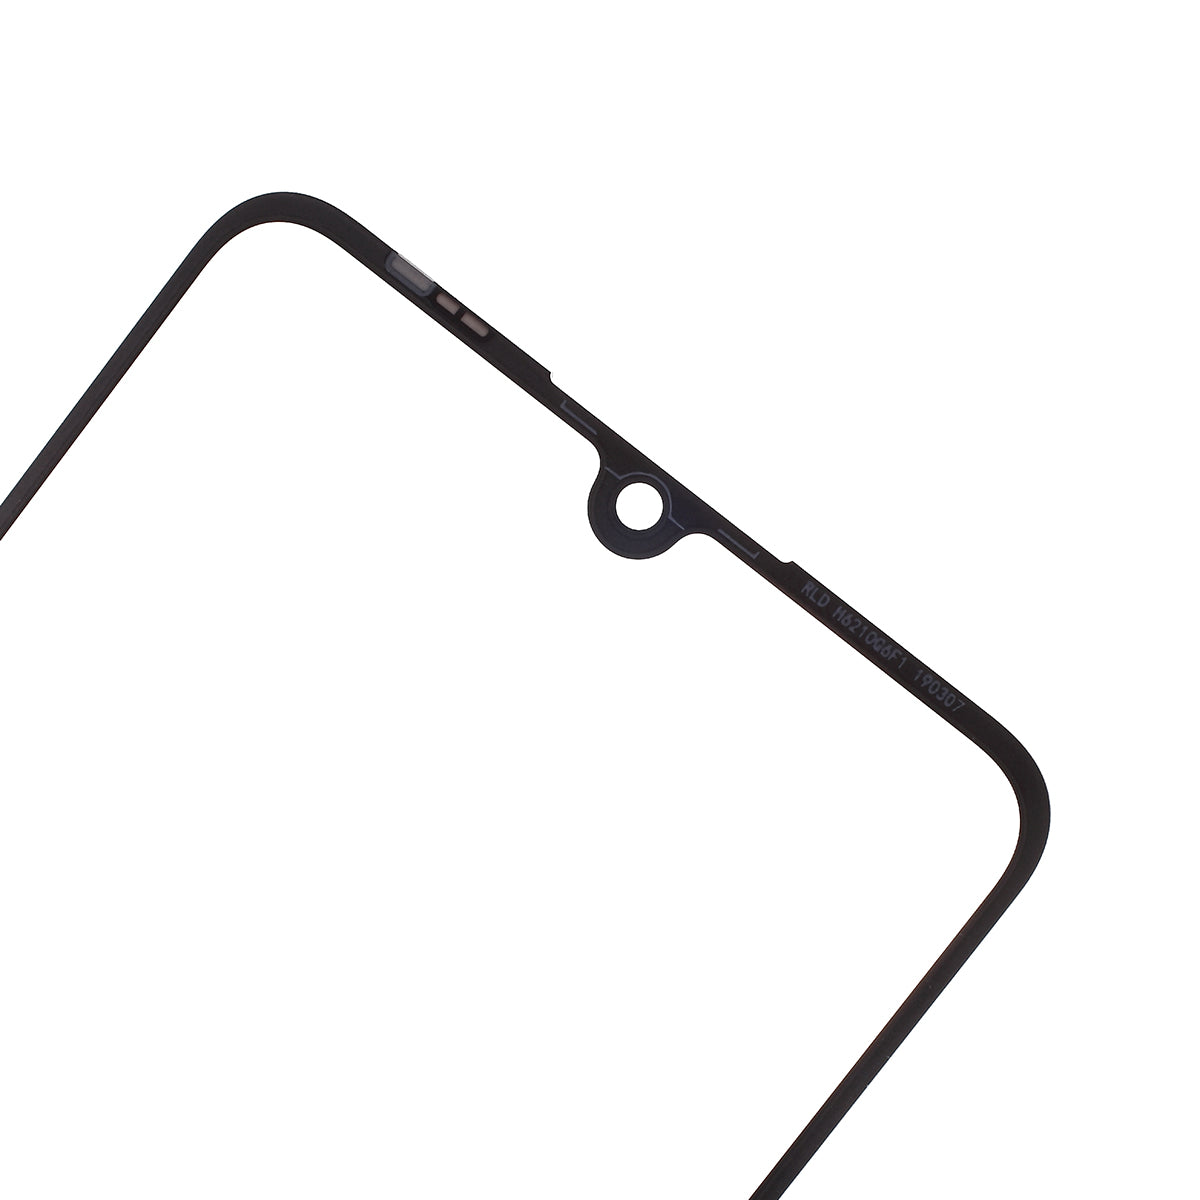 For Huawei P30 Lite Front Screen Glass Lens with Frame Replacement Part (without Logo) - Black